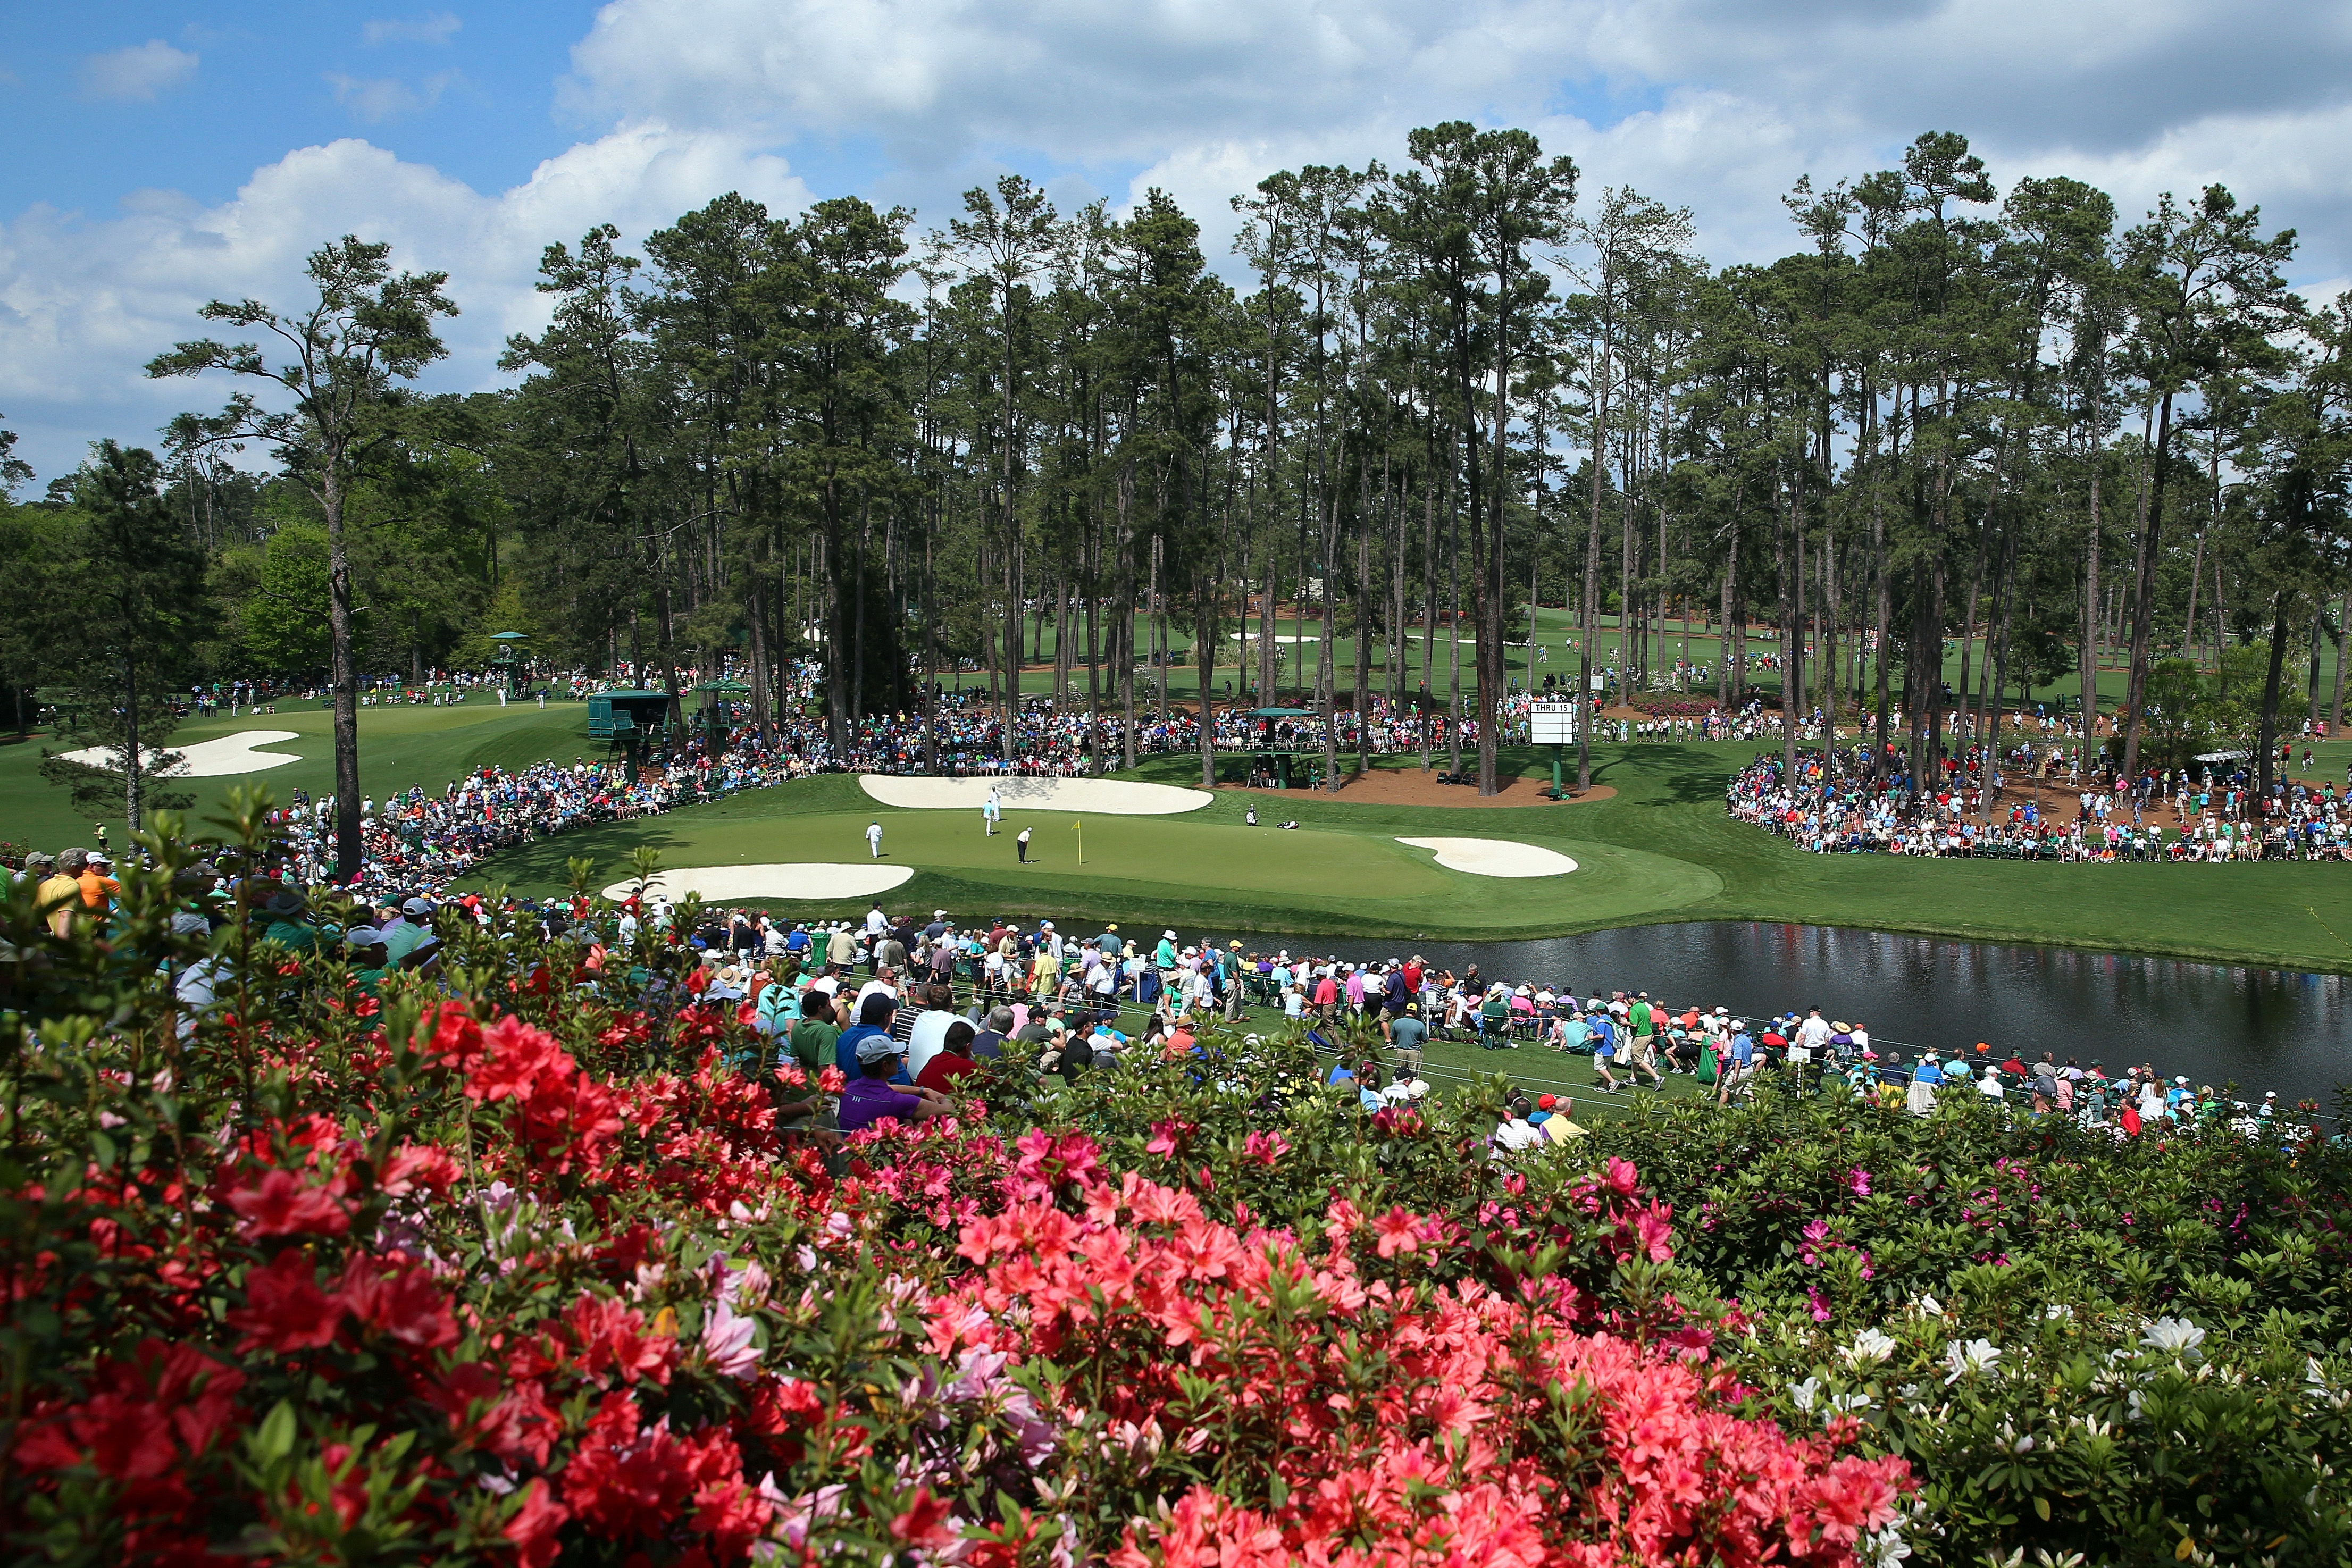 What to watch for at the Masters